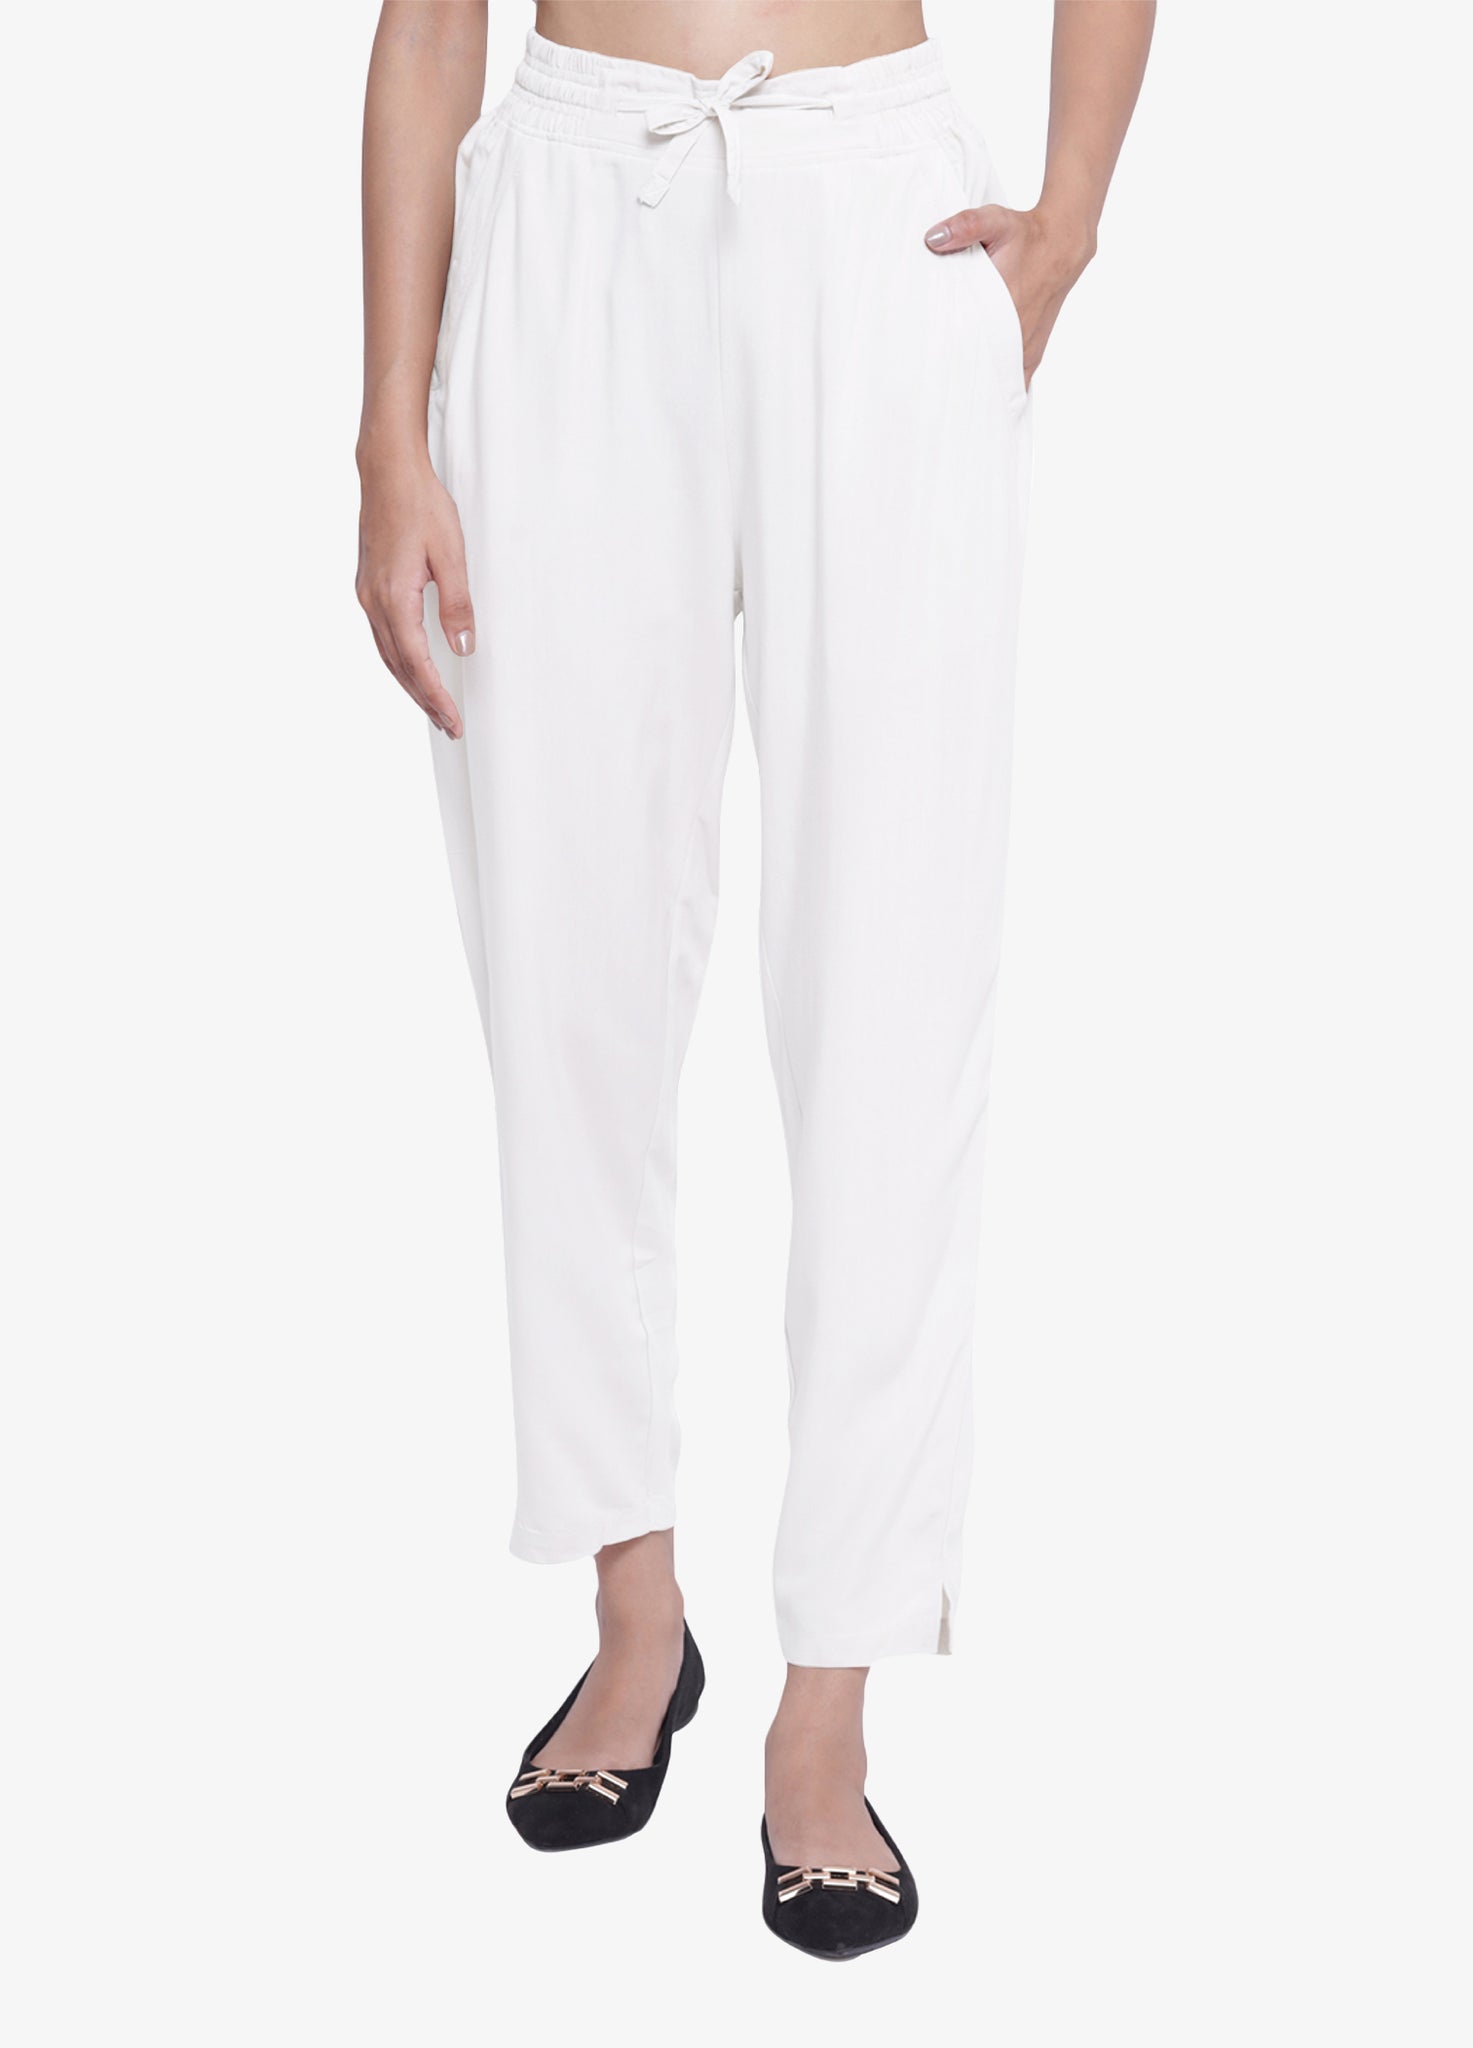 Shop The Best Cigarette Trousers For Effortless Workwear Chic